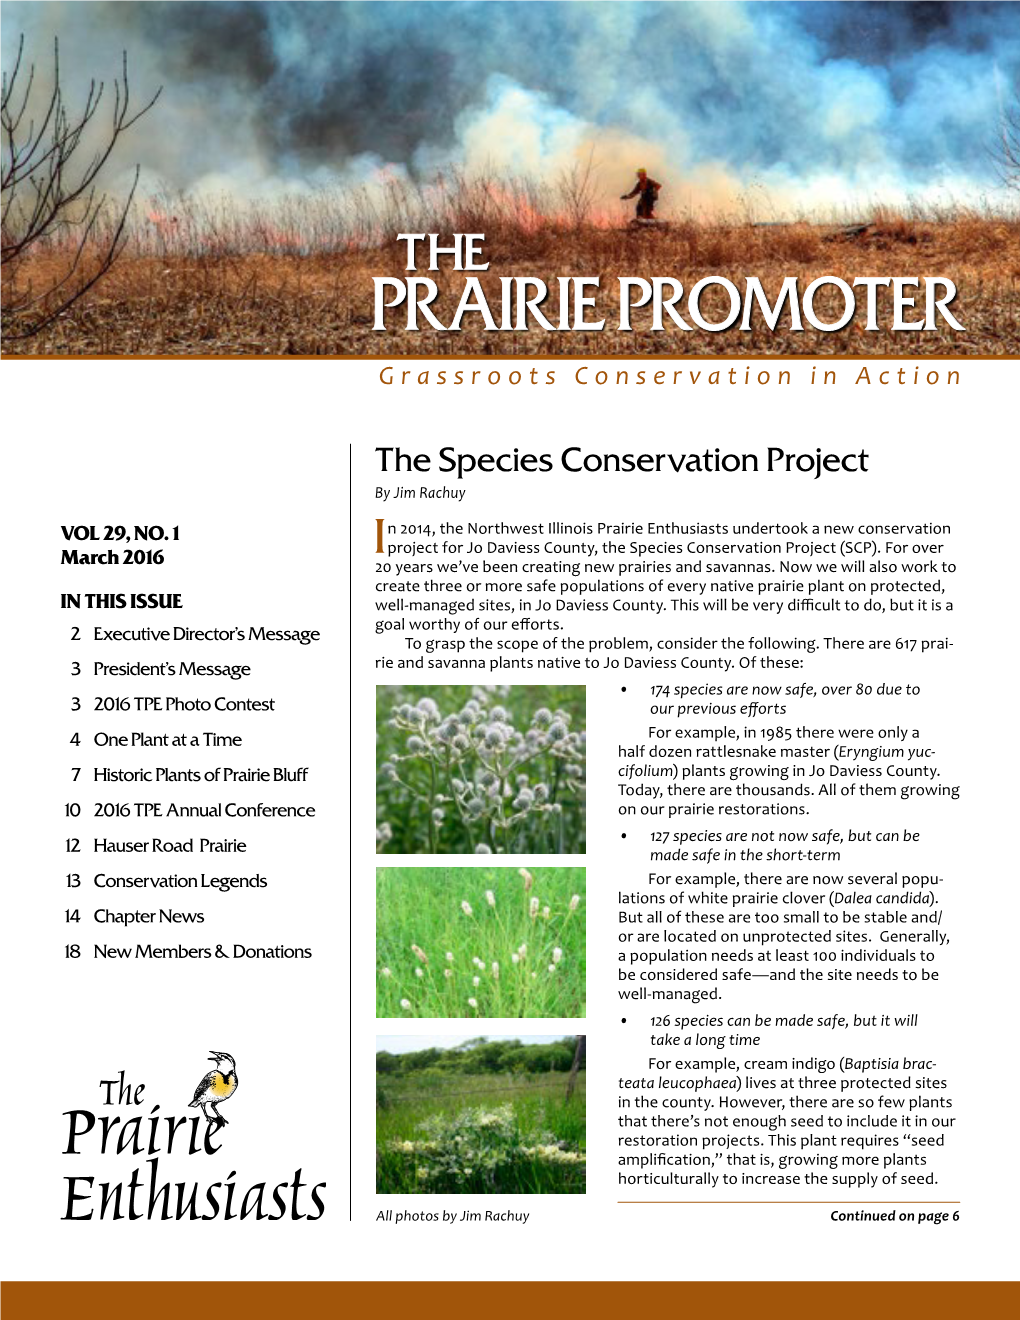 PRAIRIE PROMOTER Grassroots Conservation in Action